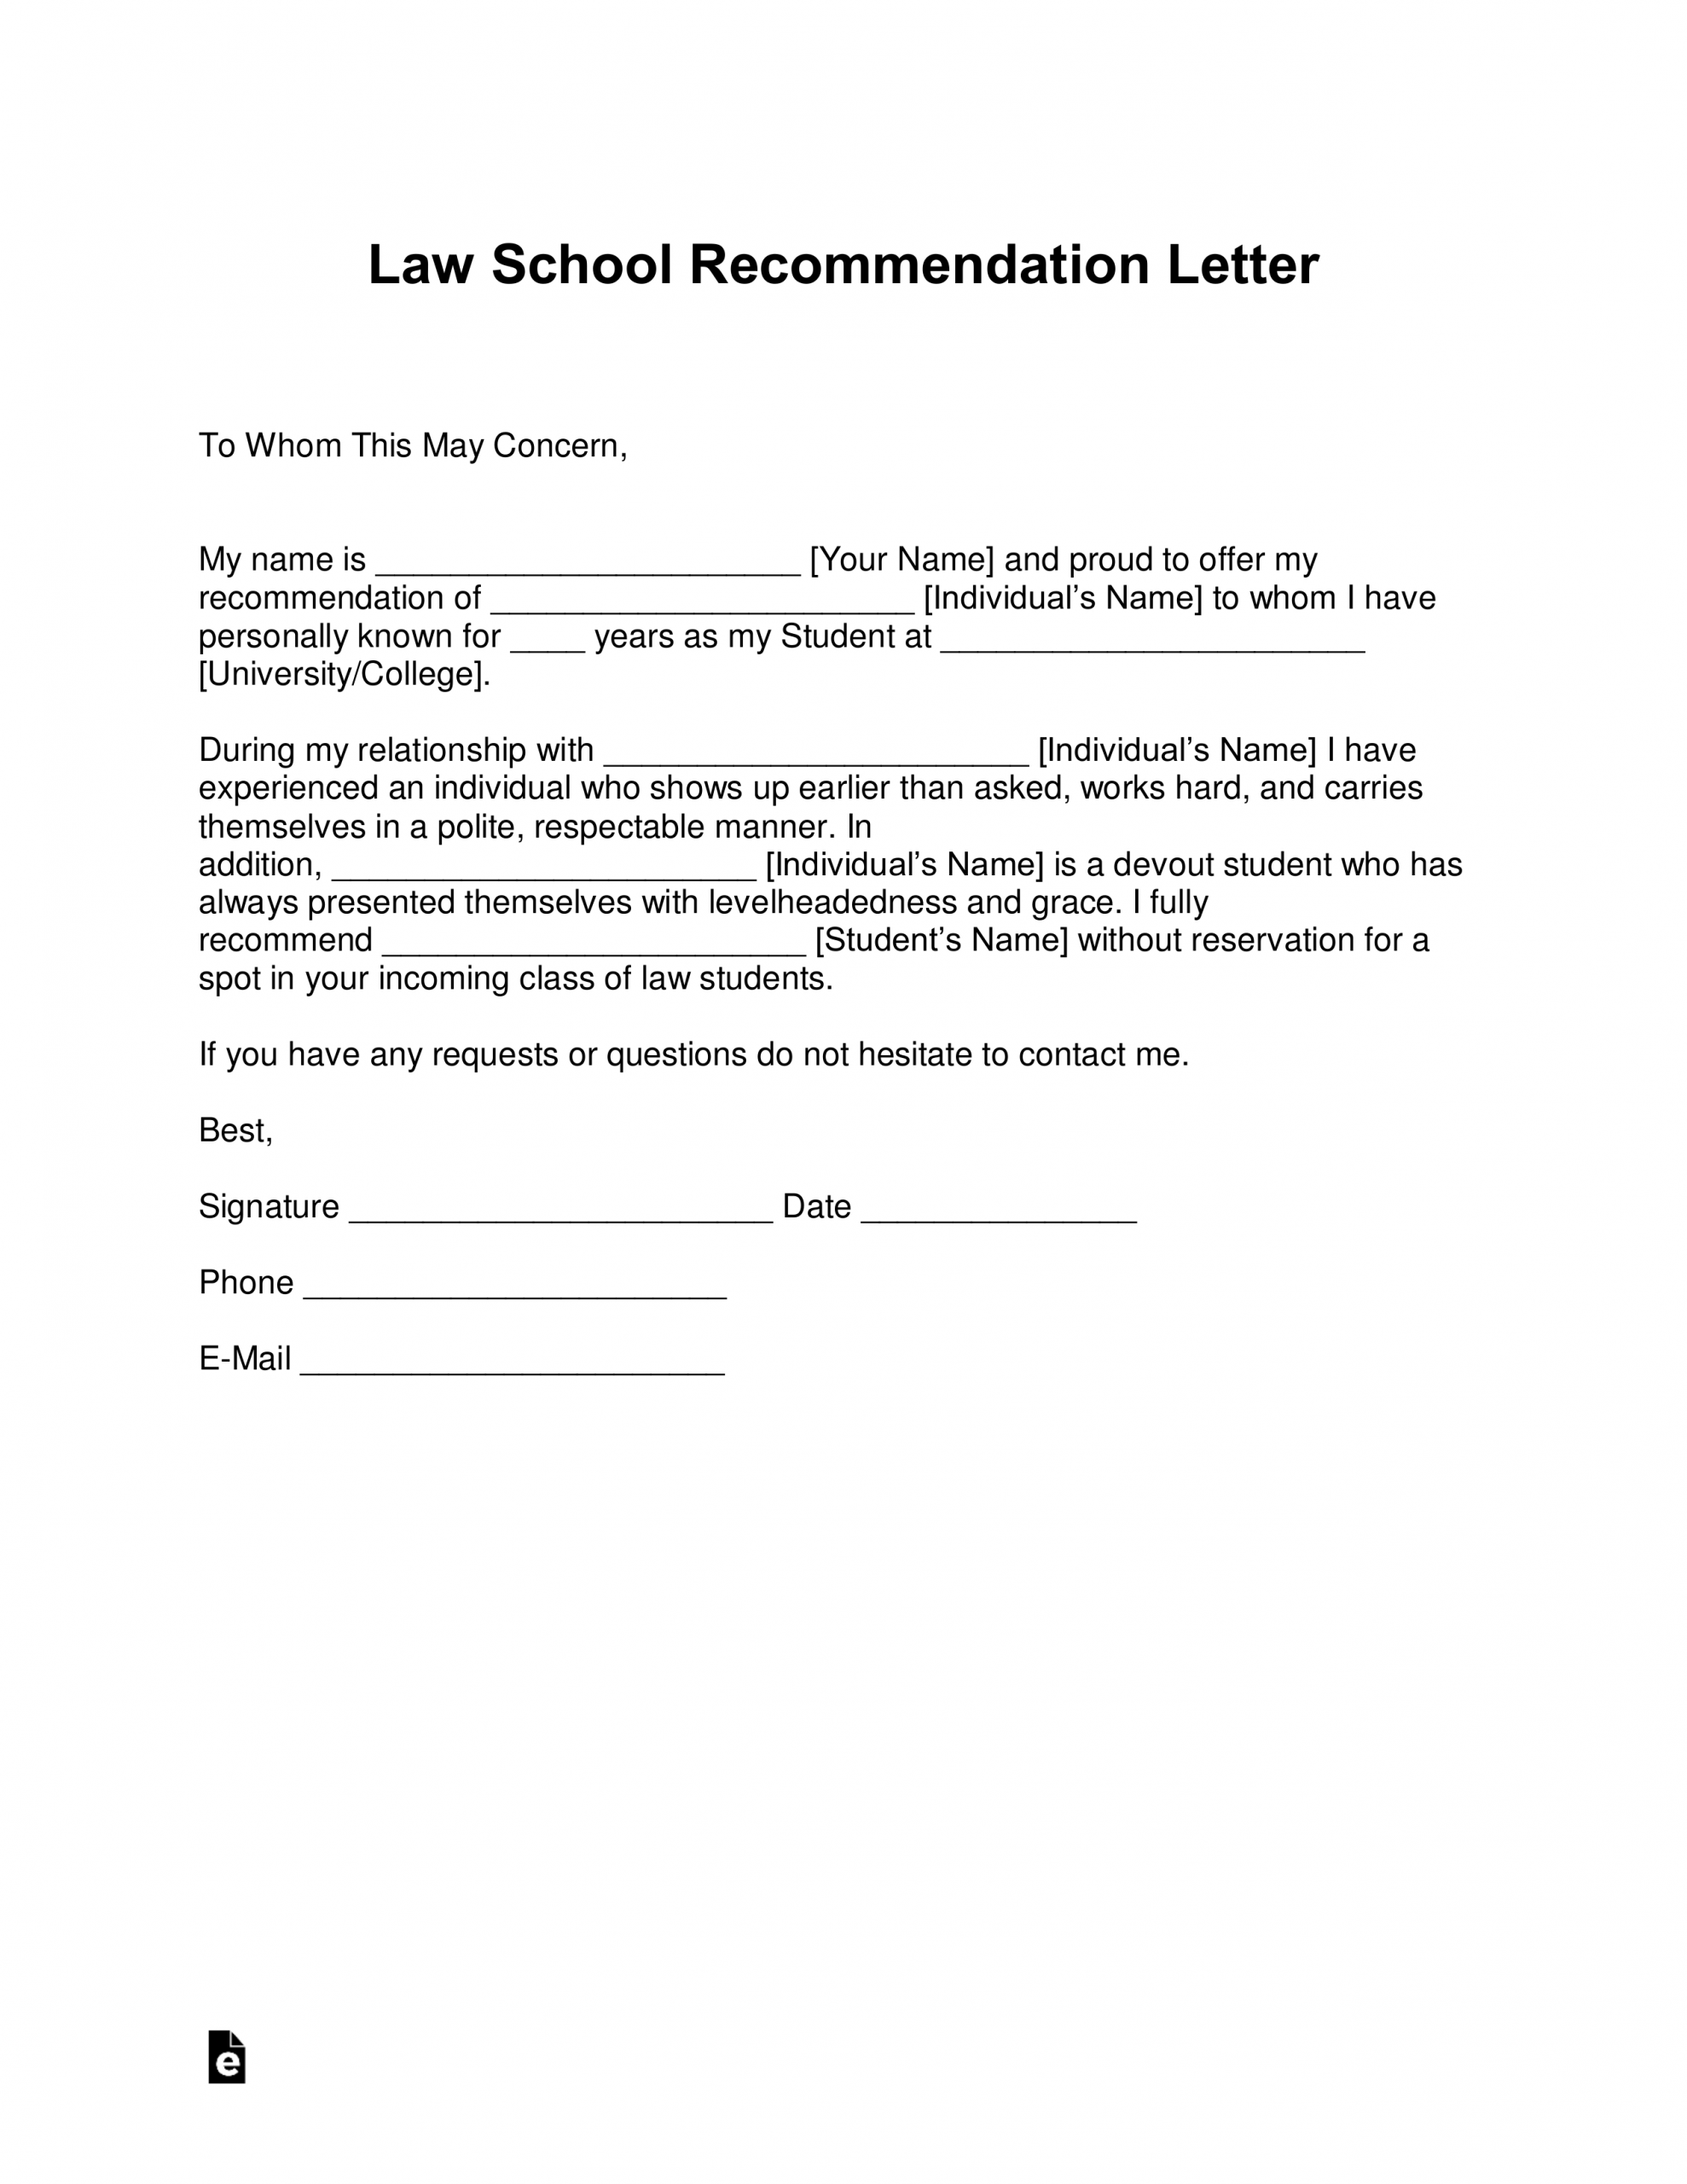 Free Law School Recommendation Letter Templates With for size 2550 X 3301